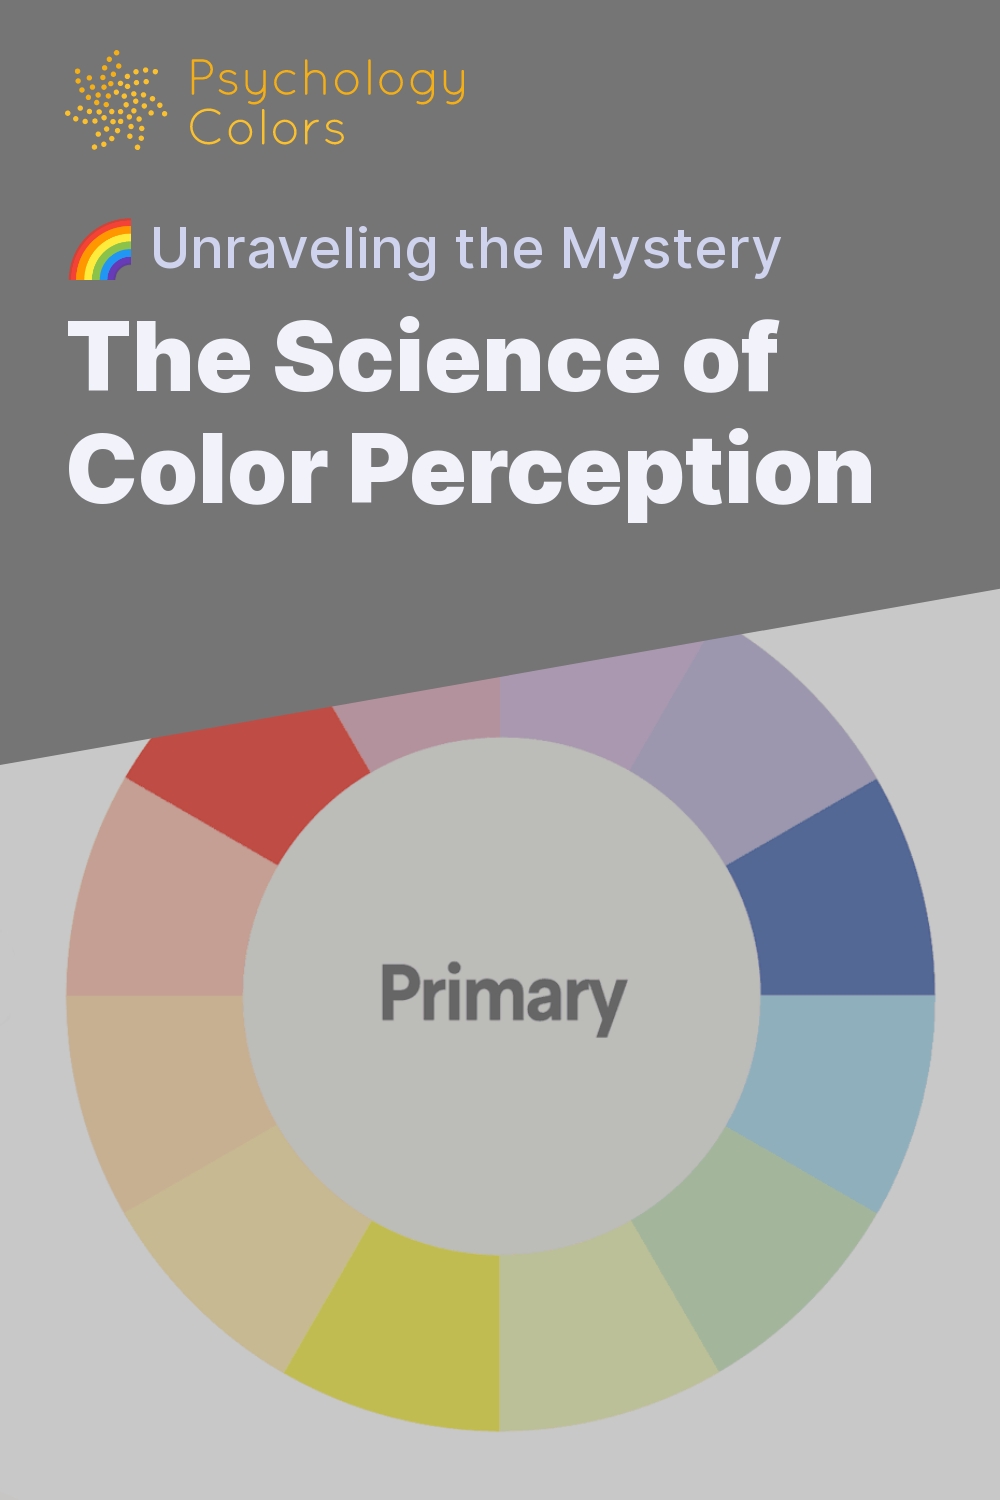 The Science of Color Perception - 🌈 Unraveling the Mystery